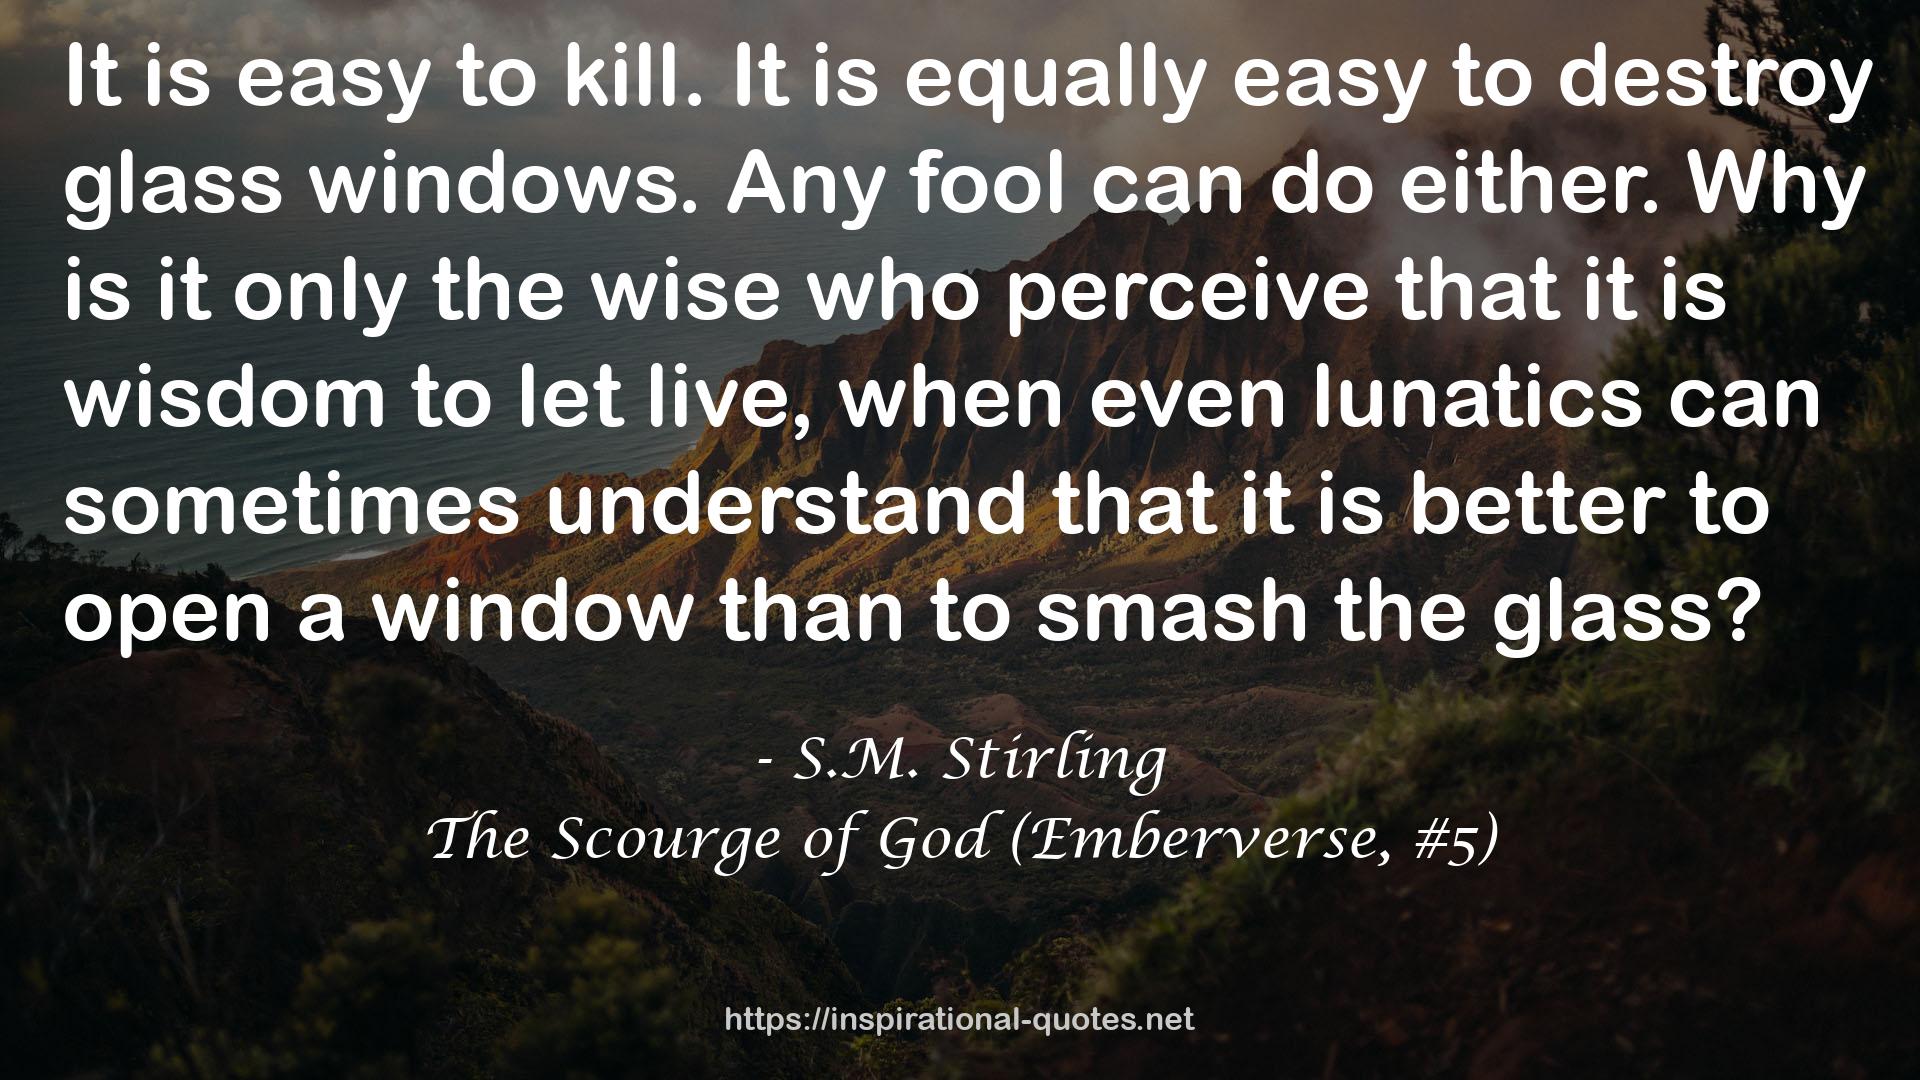 The Scourge of God (Emberverse, #5) QUOTES